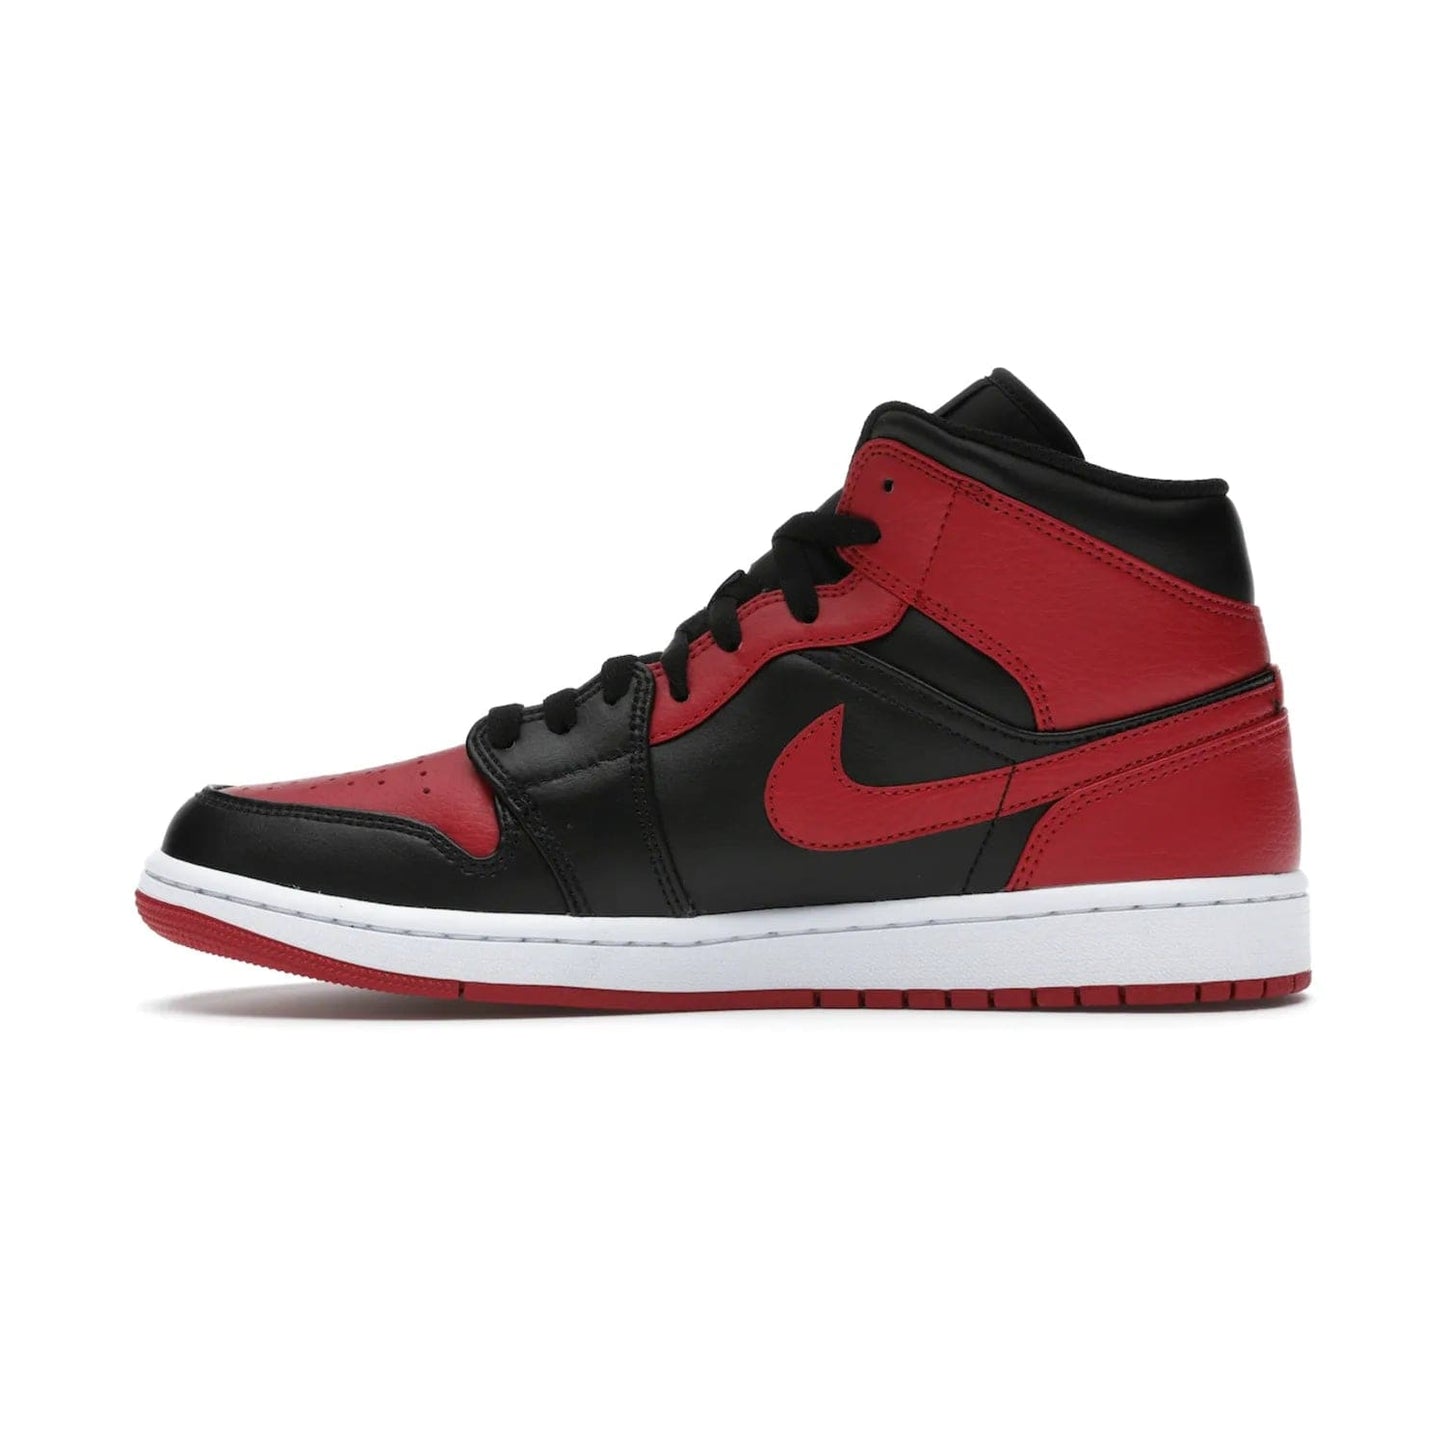 Jordan 1 Mid Banned (2020) - Image 19 - Only at www.BallersClubKickz.com - The Air Jordan 1 Mid Banned (2020) brings a modern twist to the classic Banned colorway. Features full-grain black and red leather uppers, red leather around the toe, collar, heel, & Swoosh. Release November 2021 for $110.